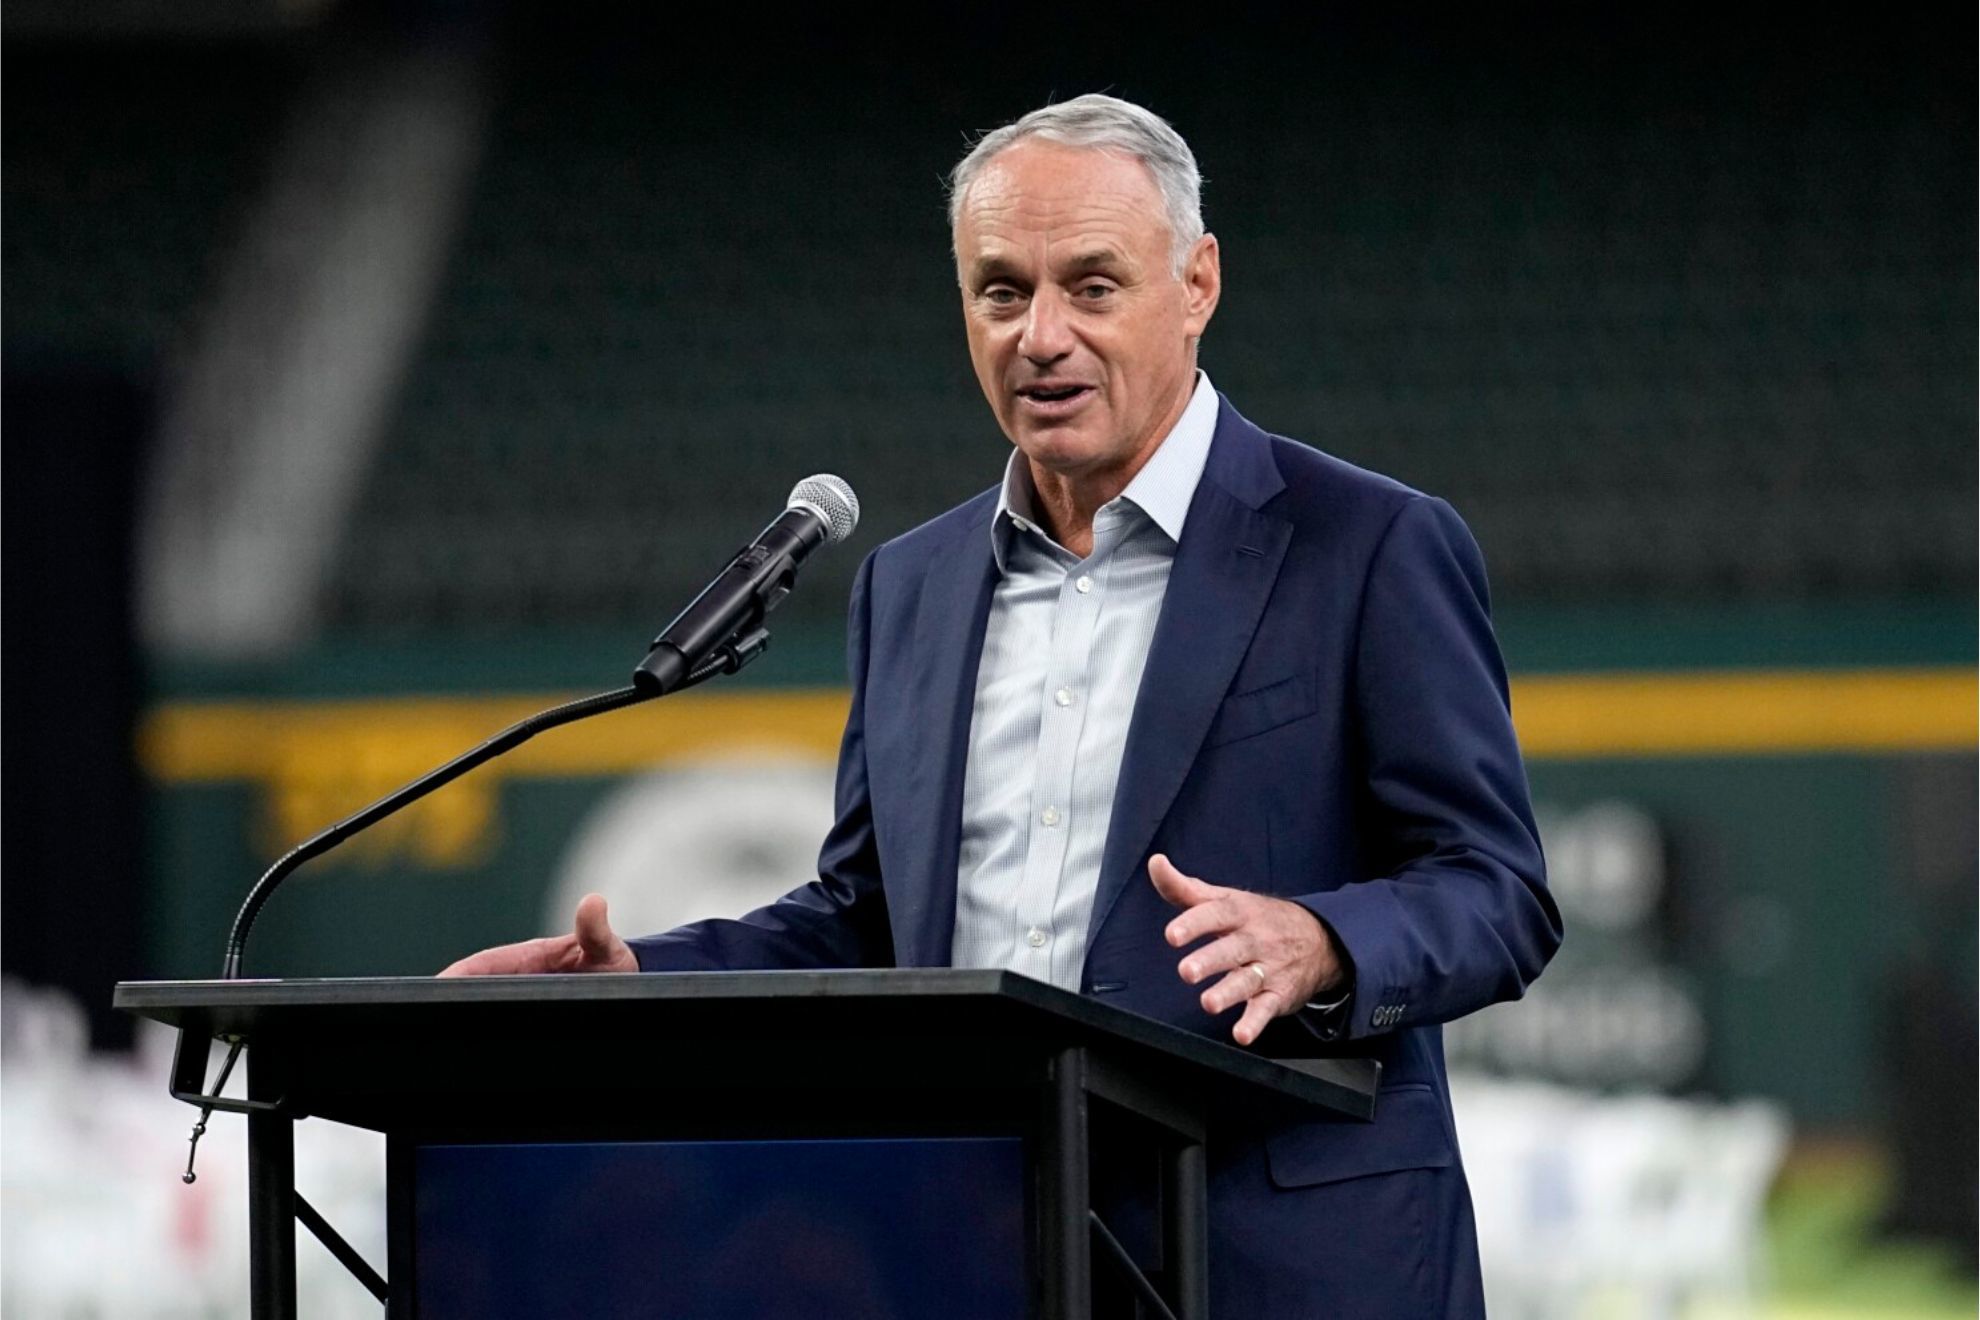 MLB playoffs will change again? Commissioner Manfred answers criticism